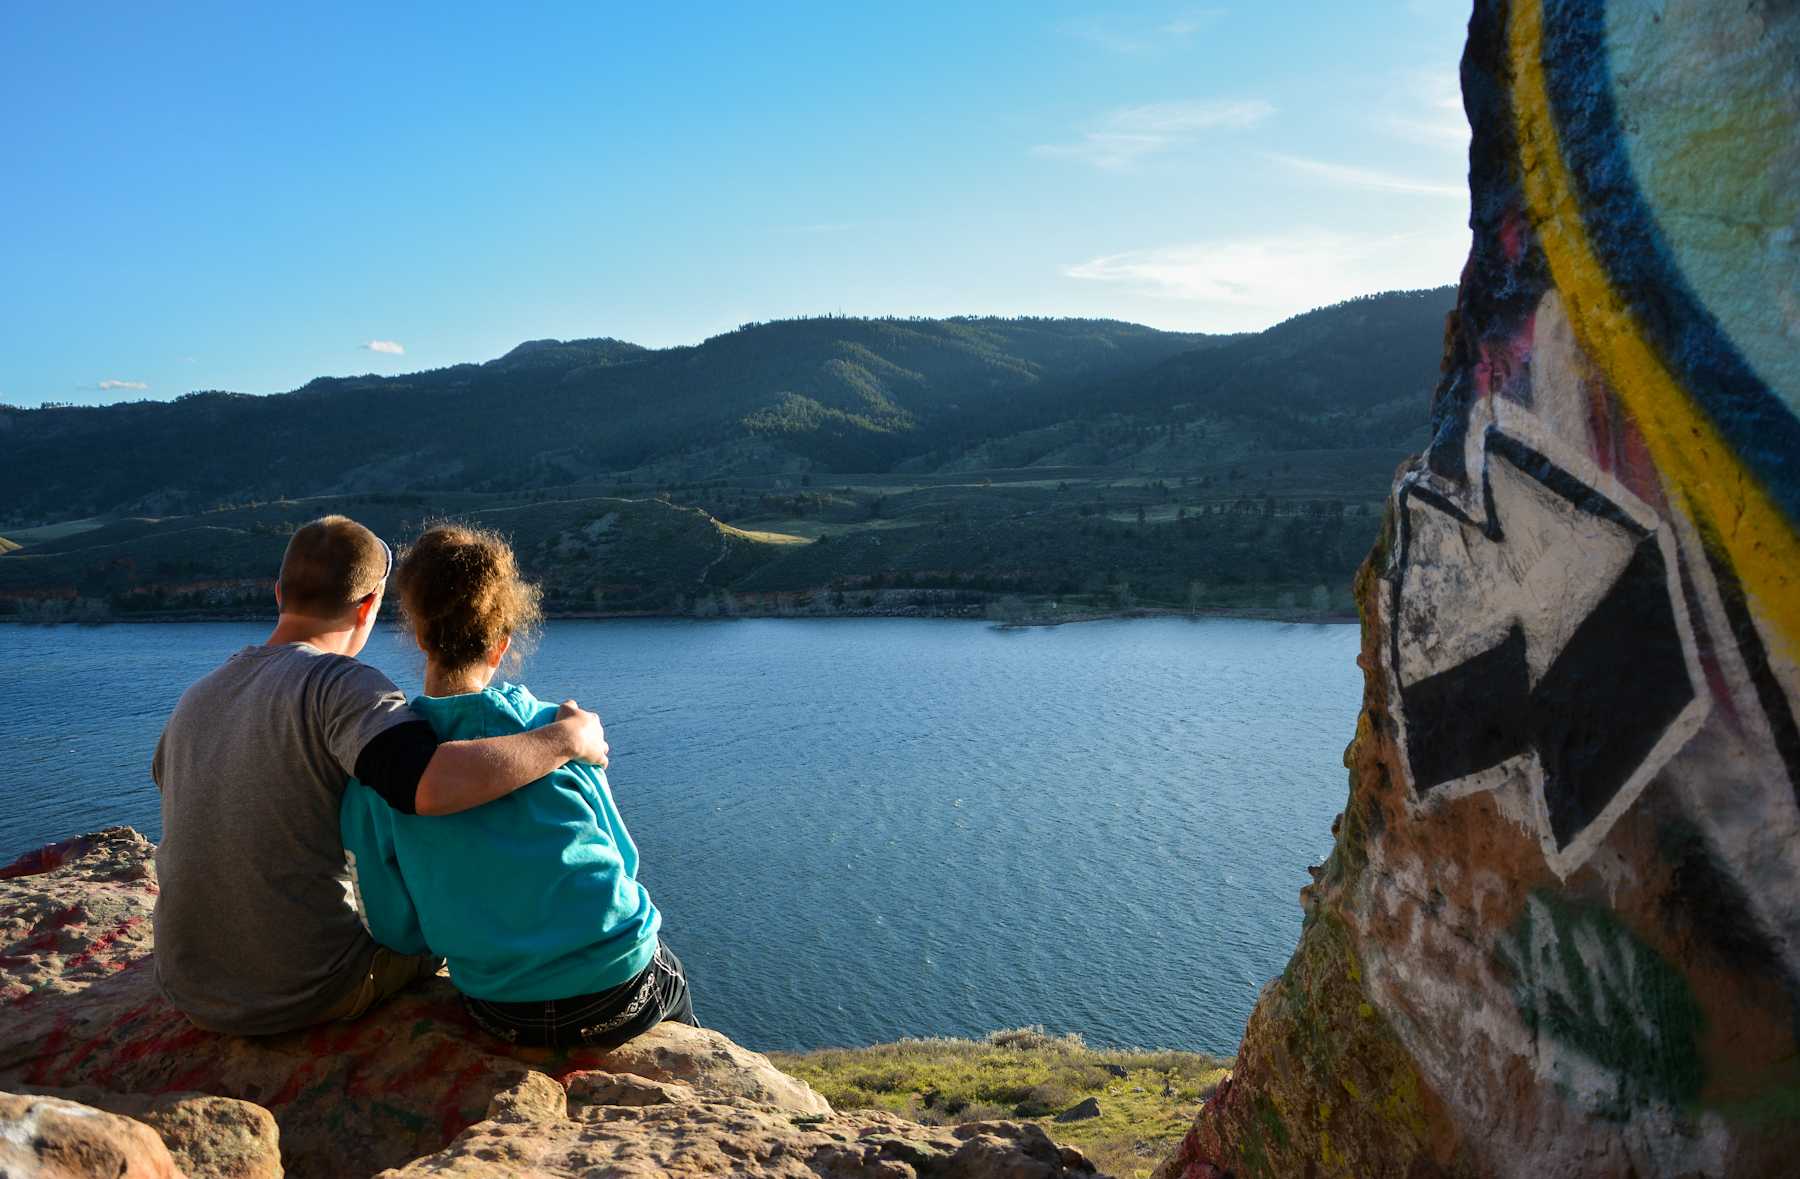 With summer closing in fast, couples are headed outdoors for their dates. Horsetooth Reservoir is a popular place to enjoy the sun, the water, the mountains, and the stars all in one day.